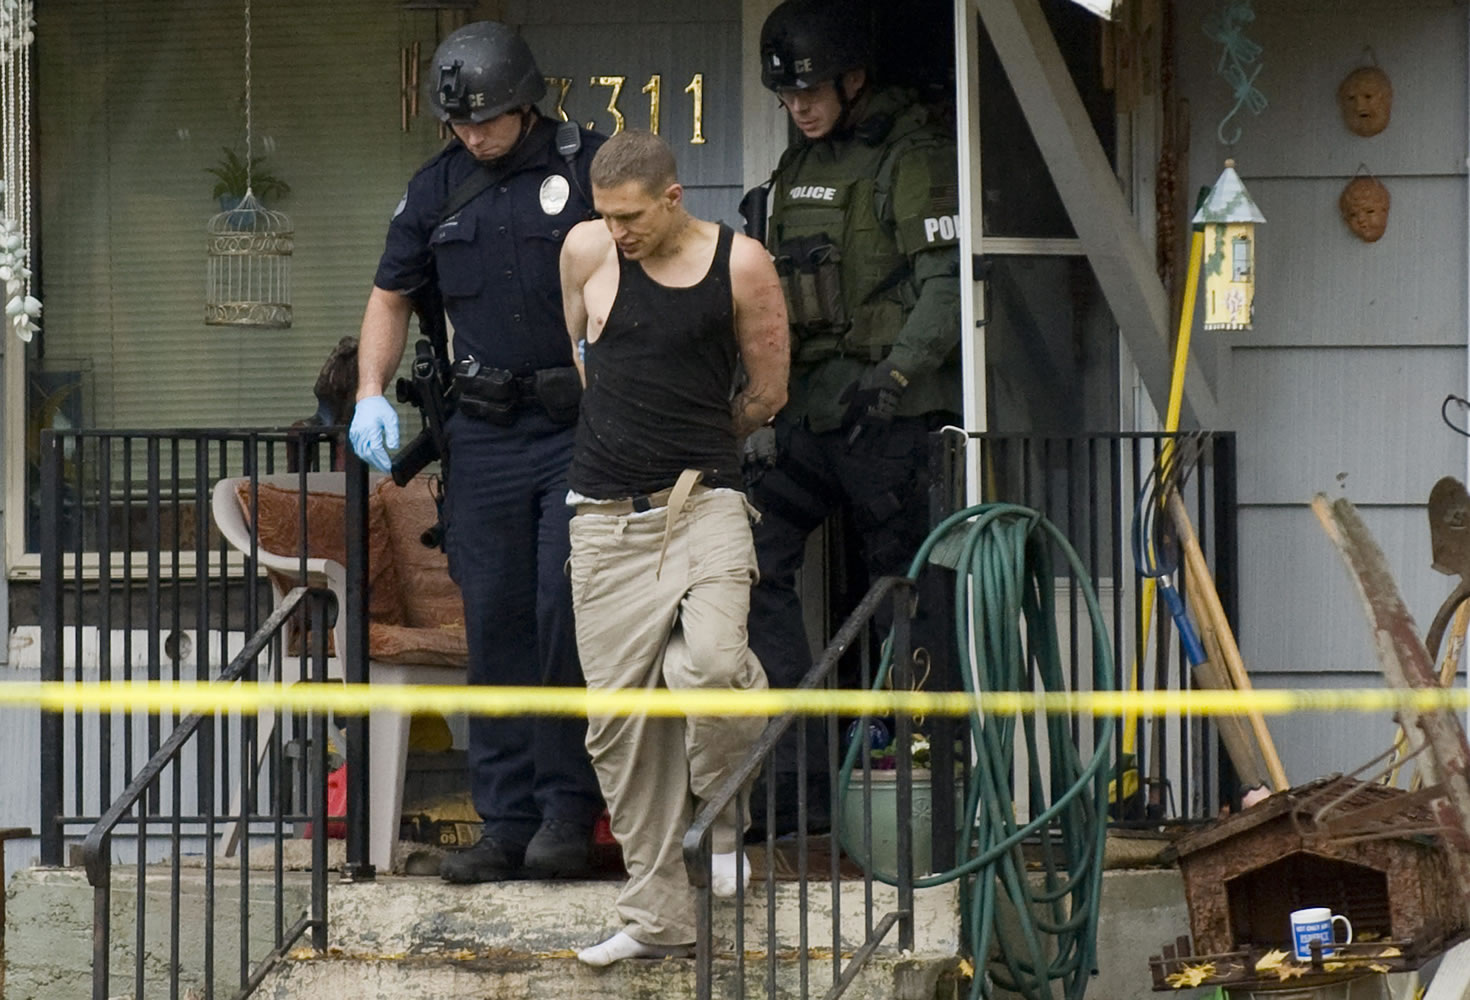 A suspect in a bank robbery is taken into custody after a 3 hour long standoff at 3311 E.